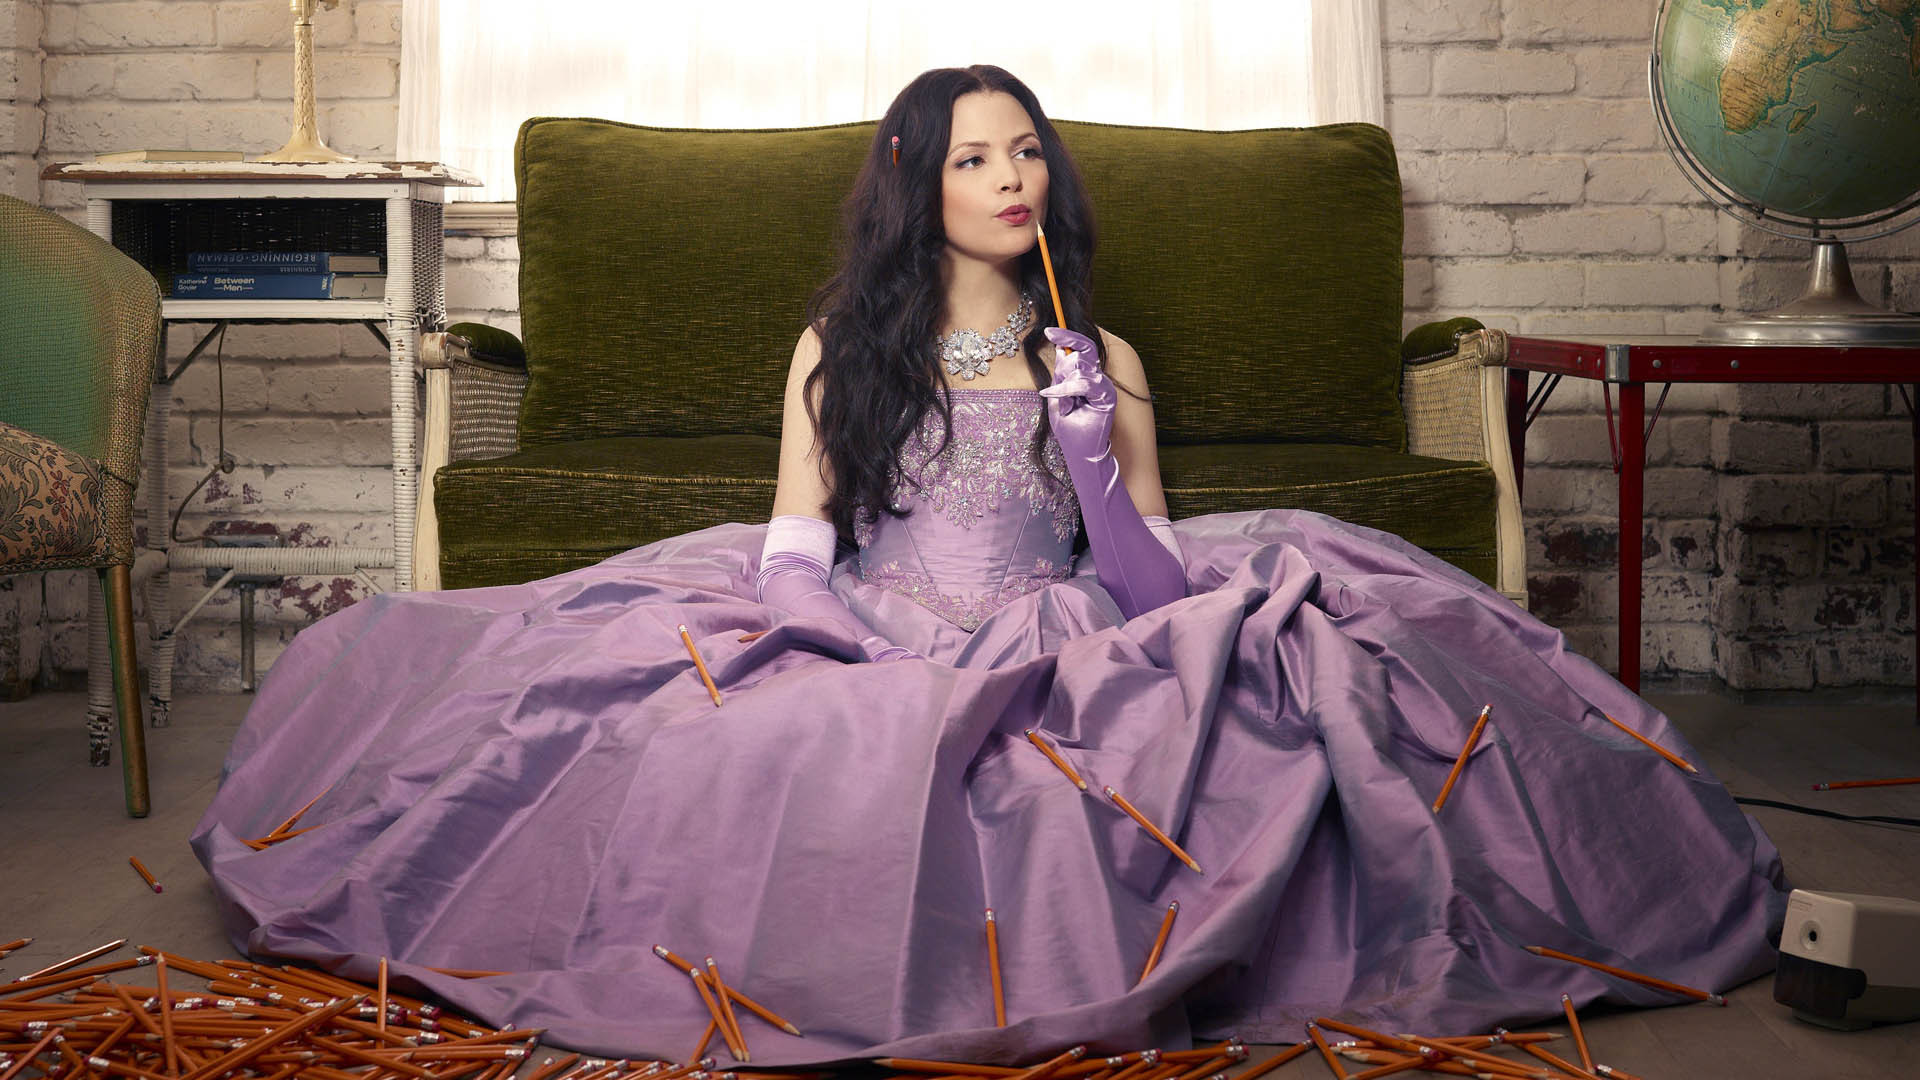 once upon a time wallpaper hd,clothing,purple,dress,violet,gown